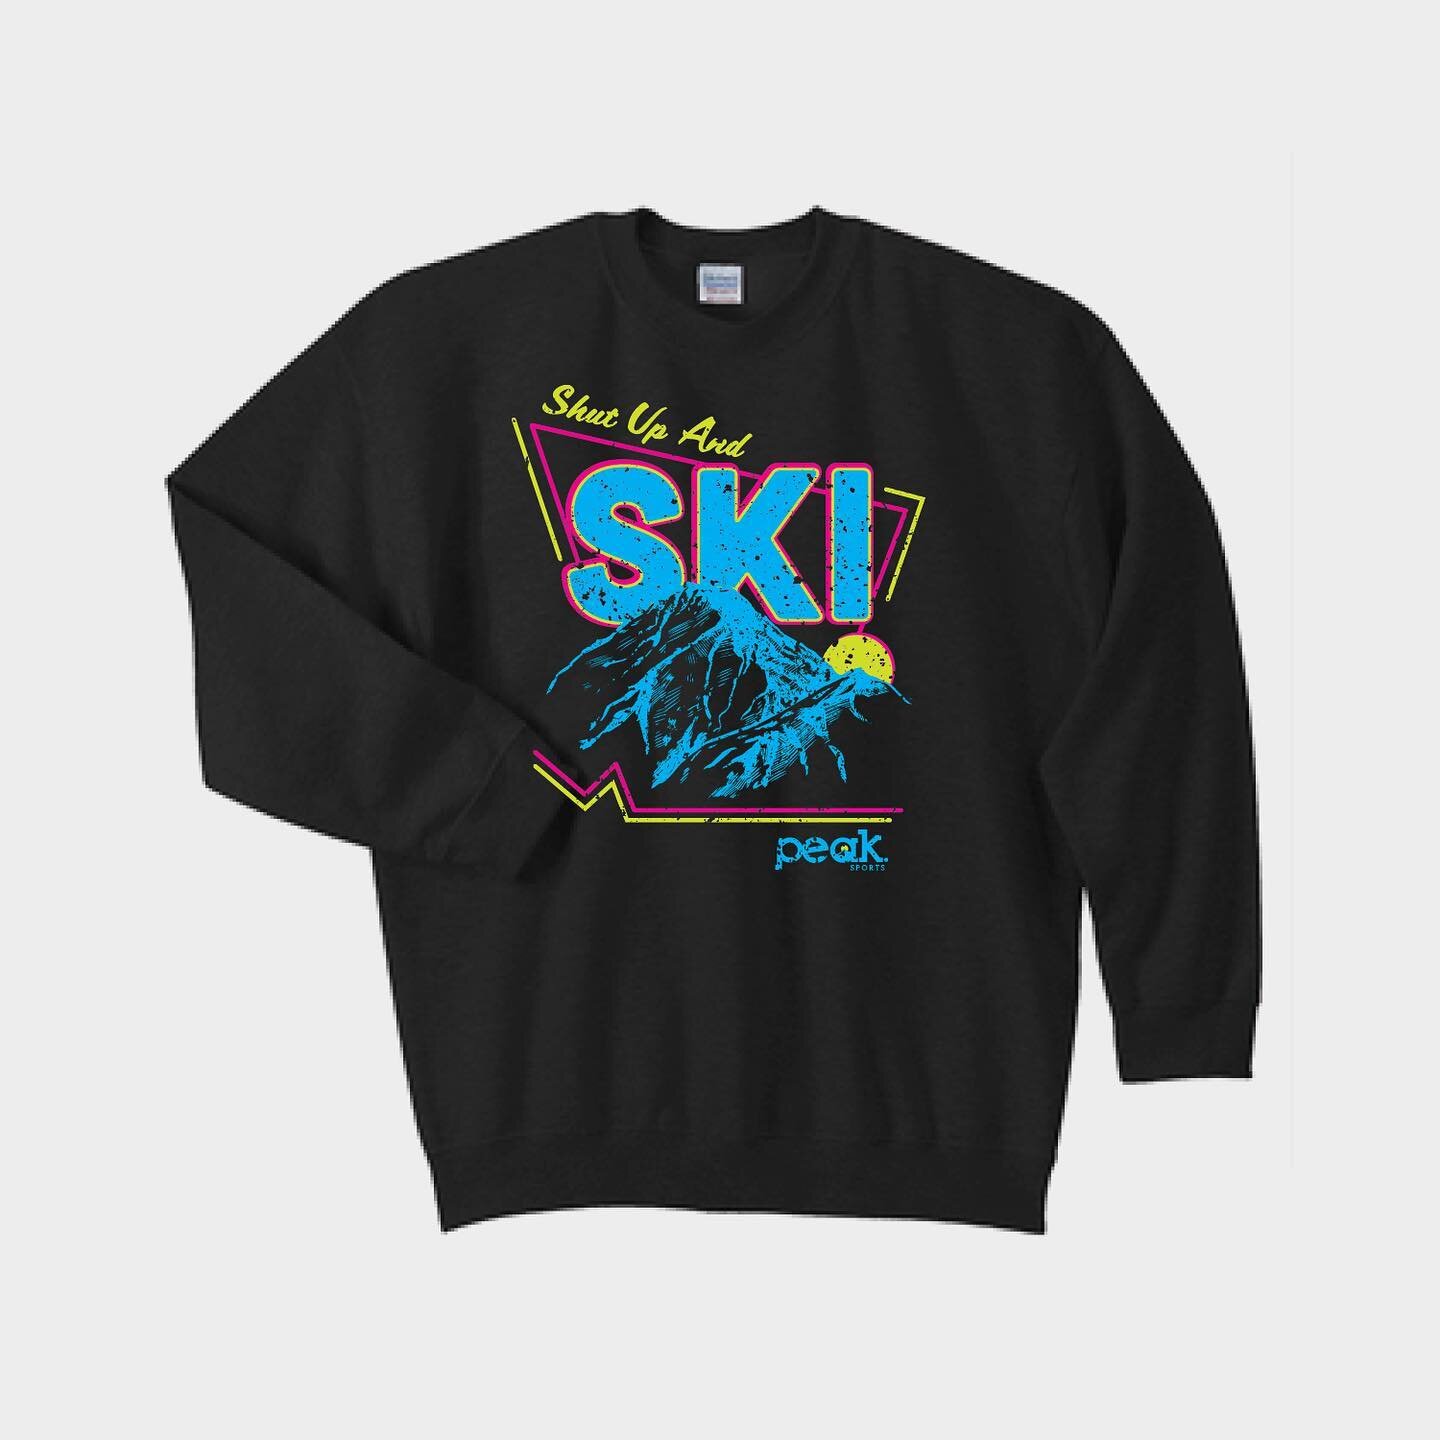 &ldquo;Shut Up and Ski!&rdquo; - Peak Sports merch is the best. 
&bull;
Purchase yours at @peaksports before they are gone!